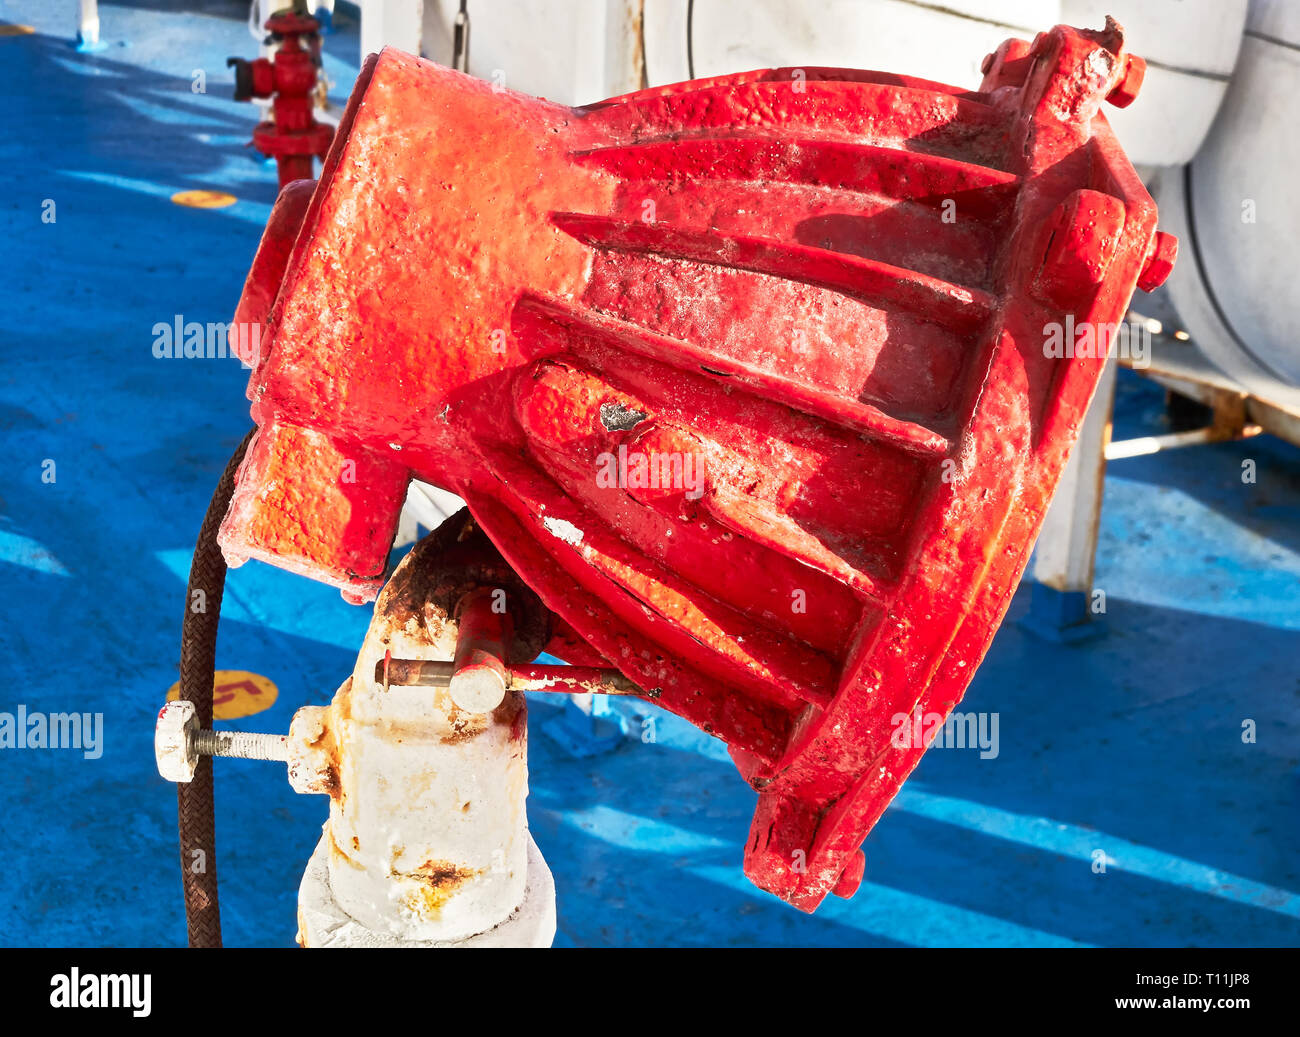 Close-up of a rusty red color painted flood light against a blue floor on deck of a ship in Asia Stock Photo